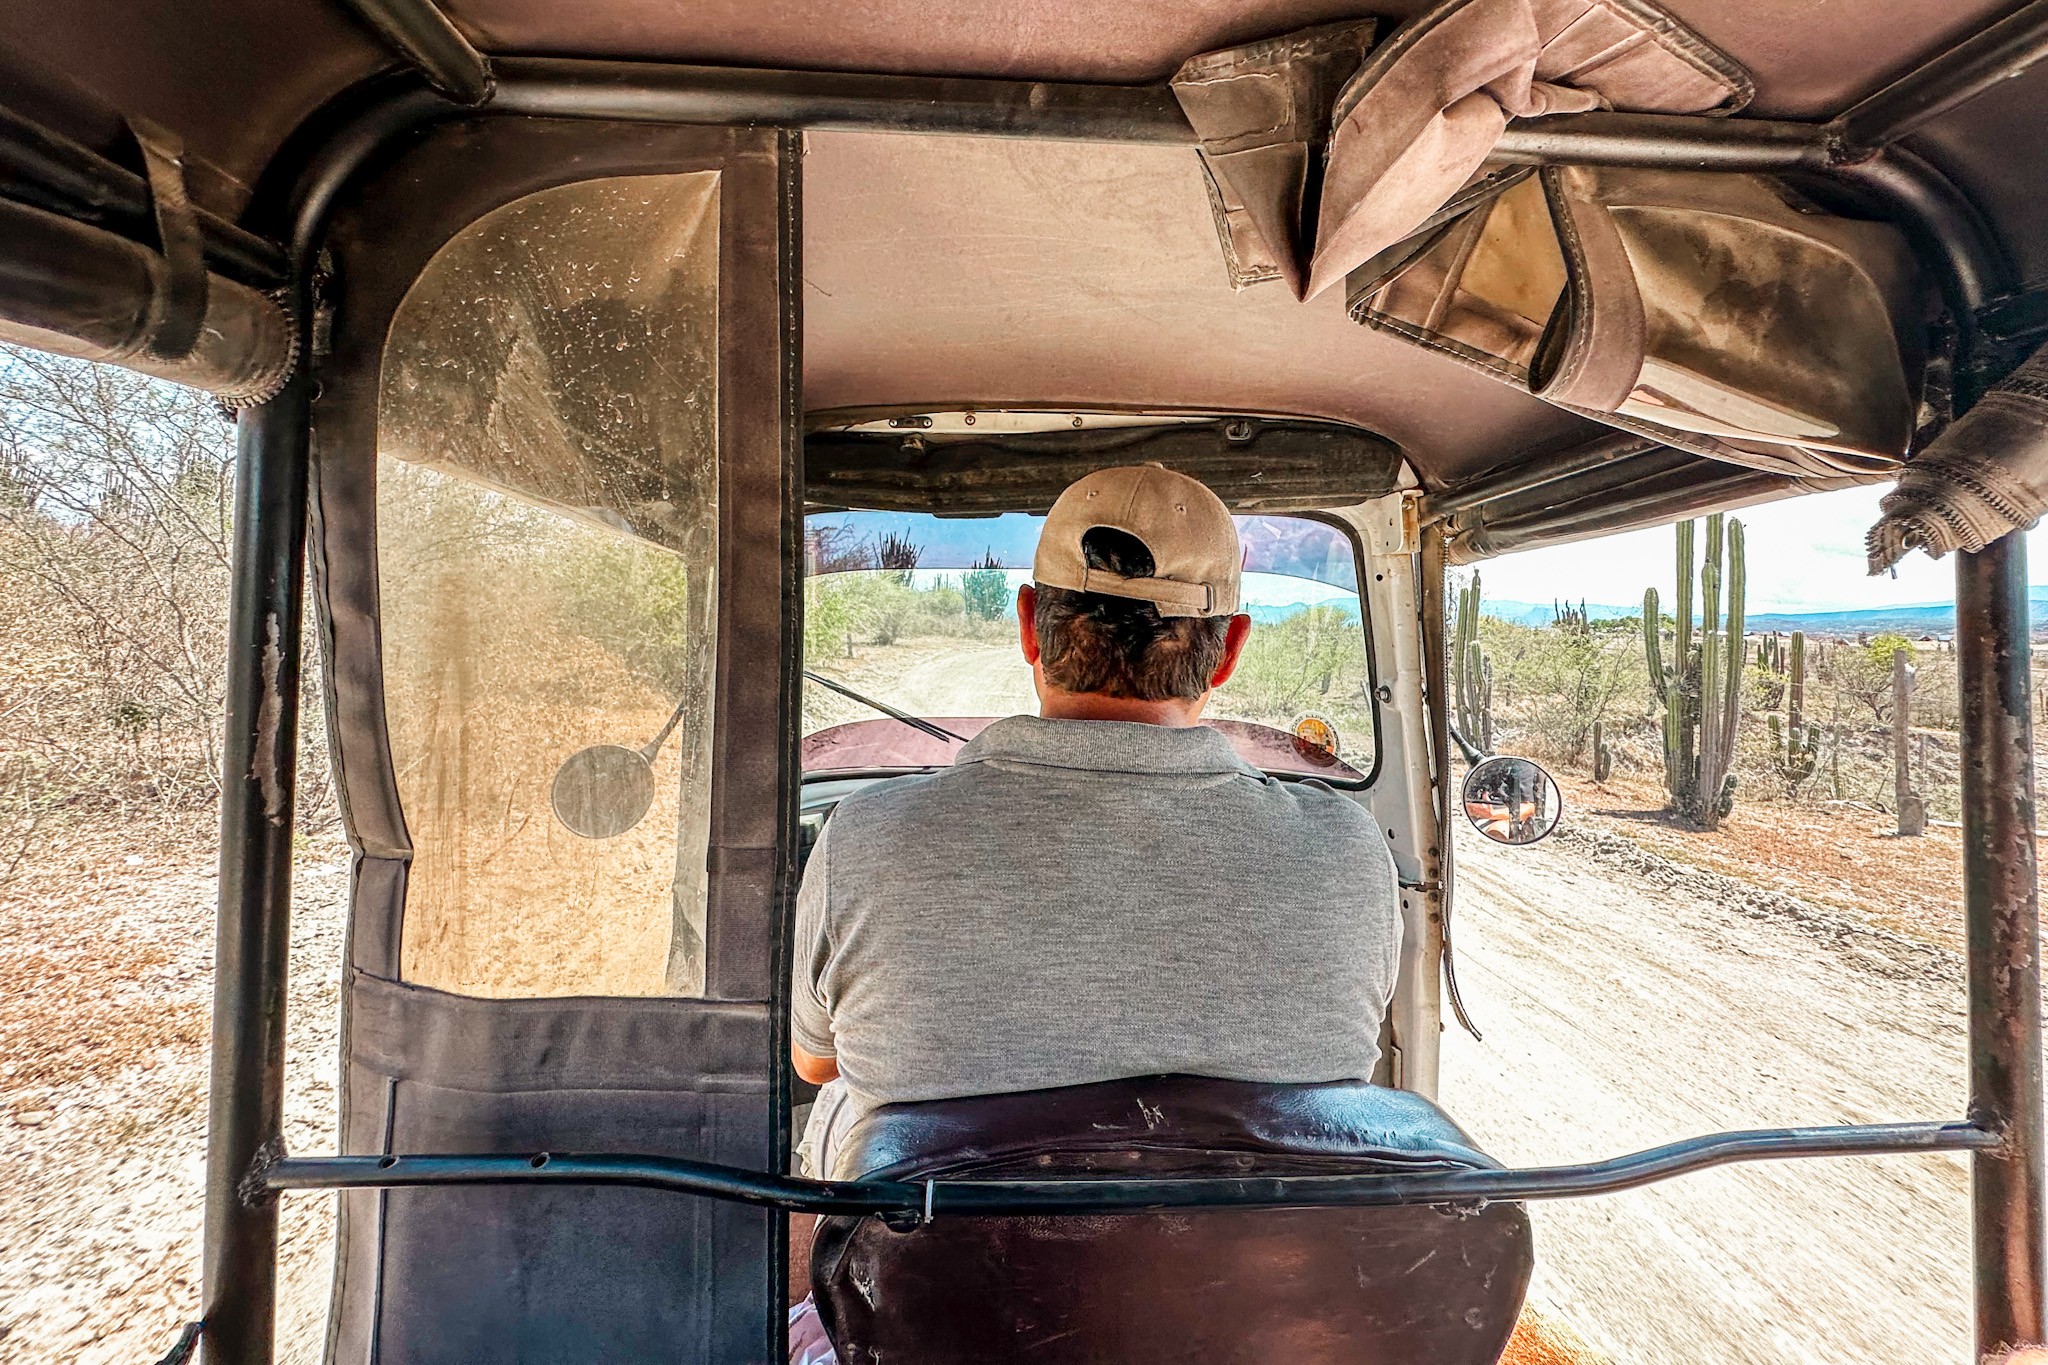 Visit the Tatacoa Desert - A Complete Guide: Get Around With A TukTuk